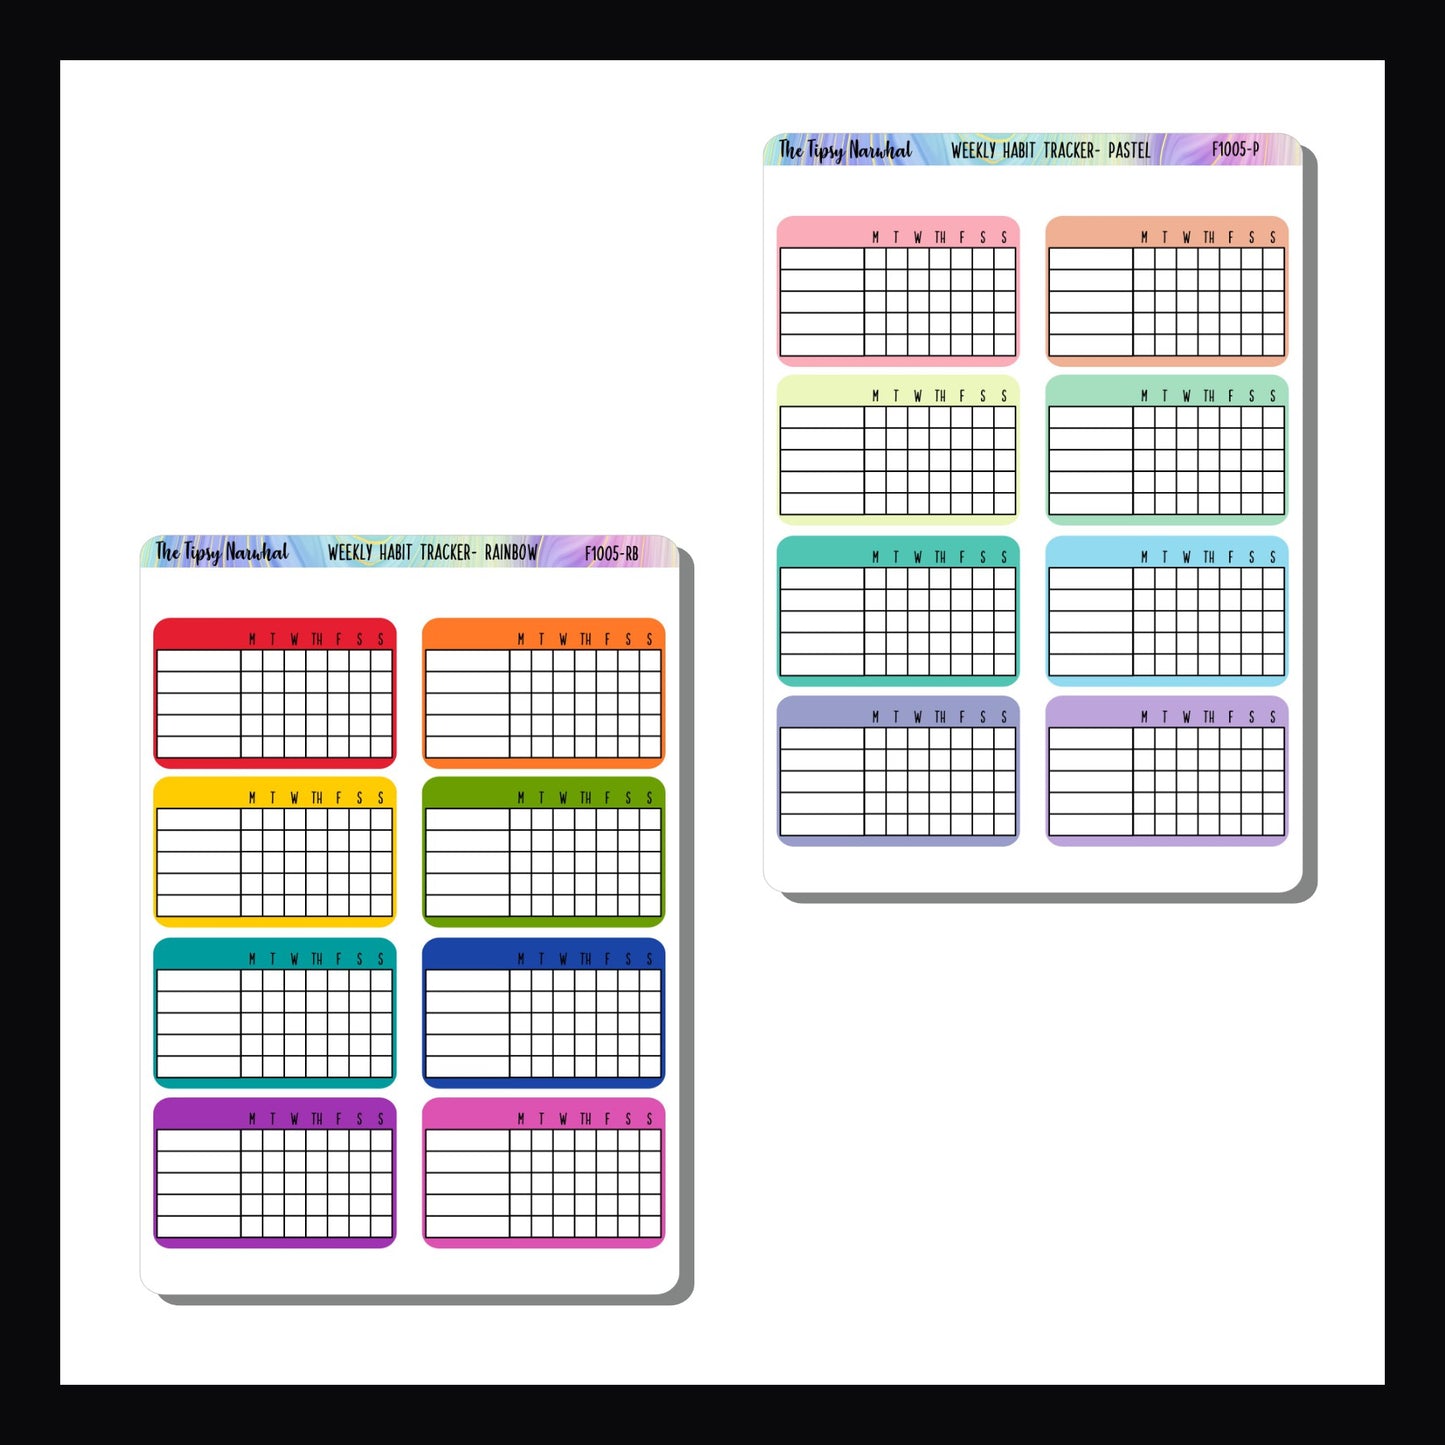 Rainbow and Pastel weekly habit tracker sticker sheets